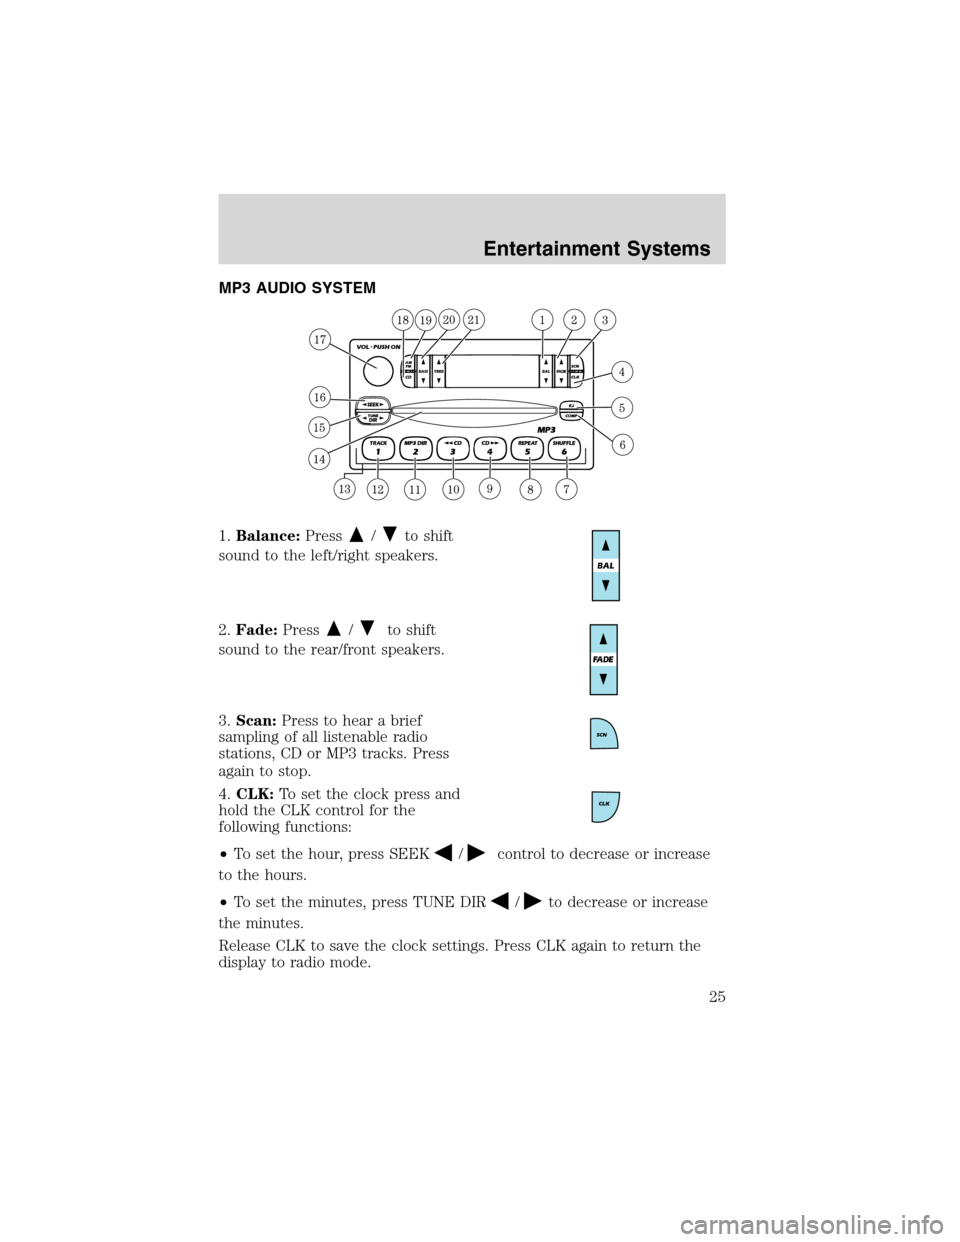 Mercury Mountaineer 2003  Owners Manuals MP3 AUDIO SYSTEM
1.Balance:Press
/to shift
sound to the left/right speakers.
2.Fade:Press
/to shift
sound to the rear/front speakers.
3.Scan:Press to hear a brief
sampling of all listenable radio
stat